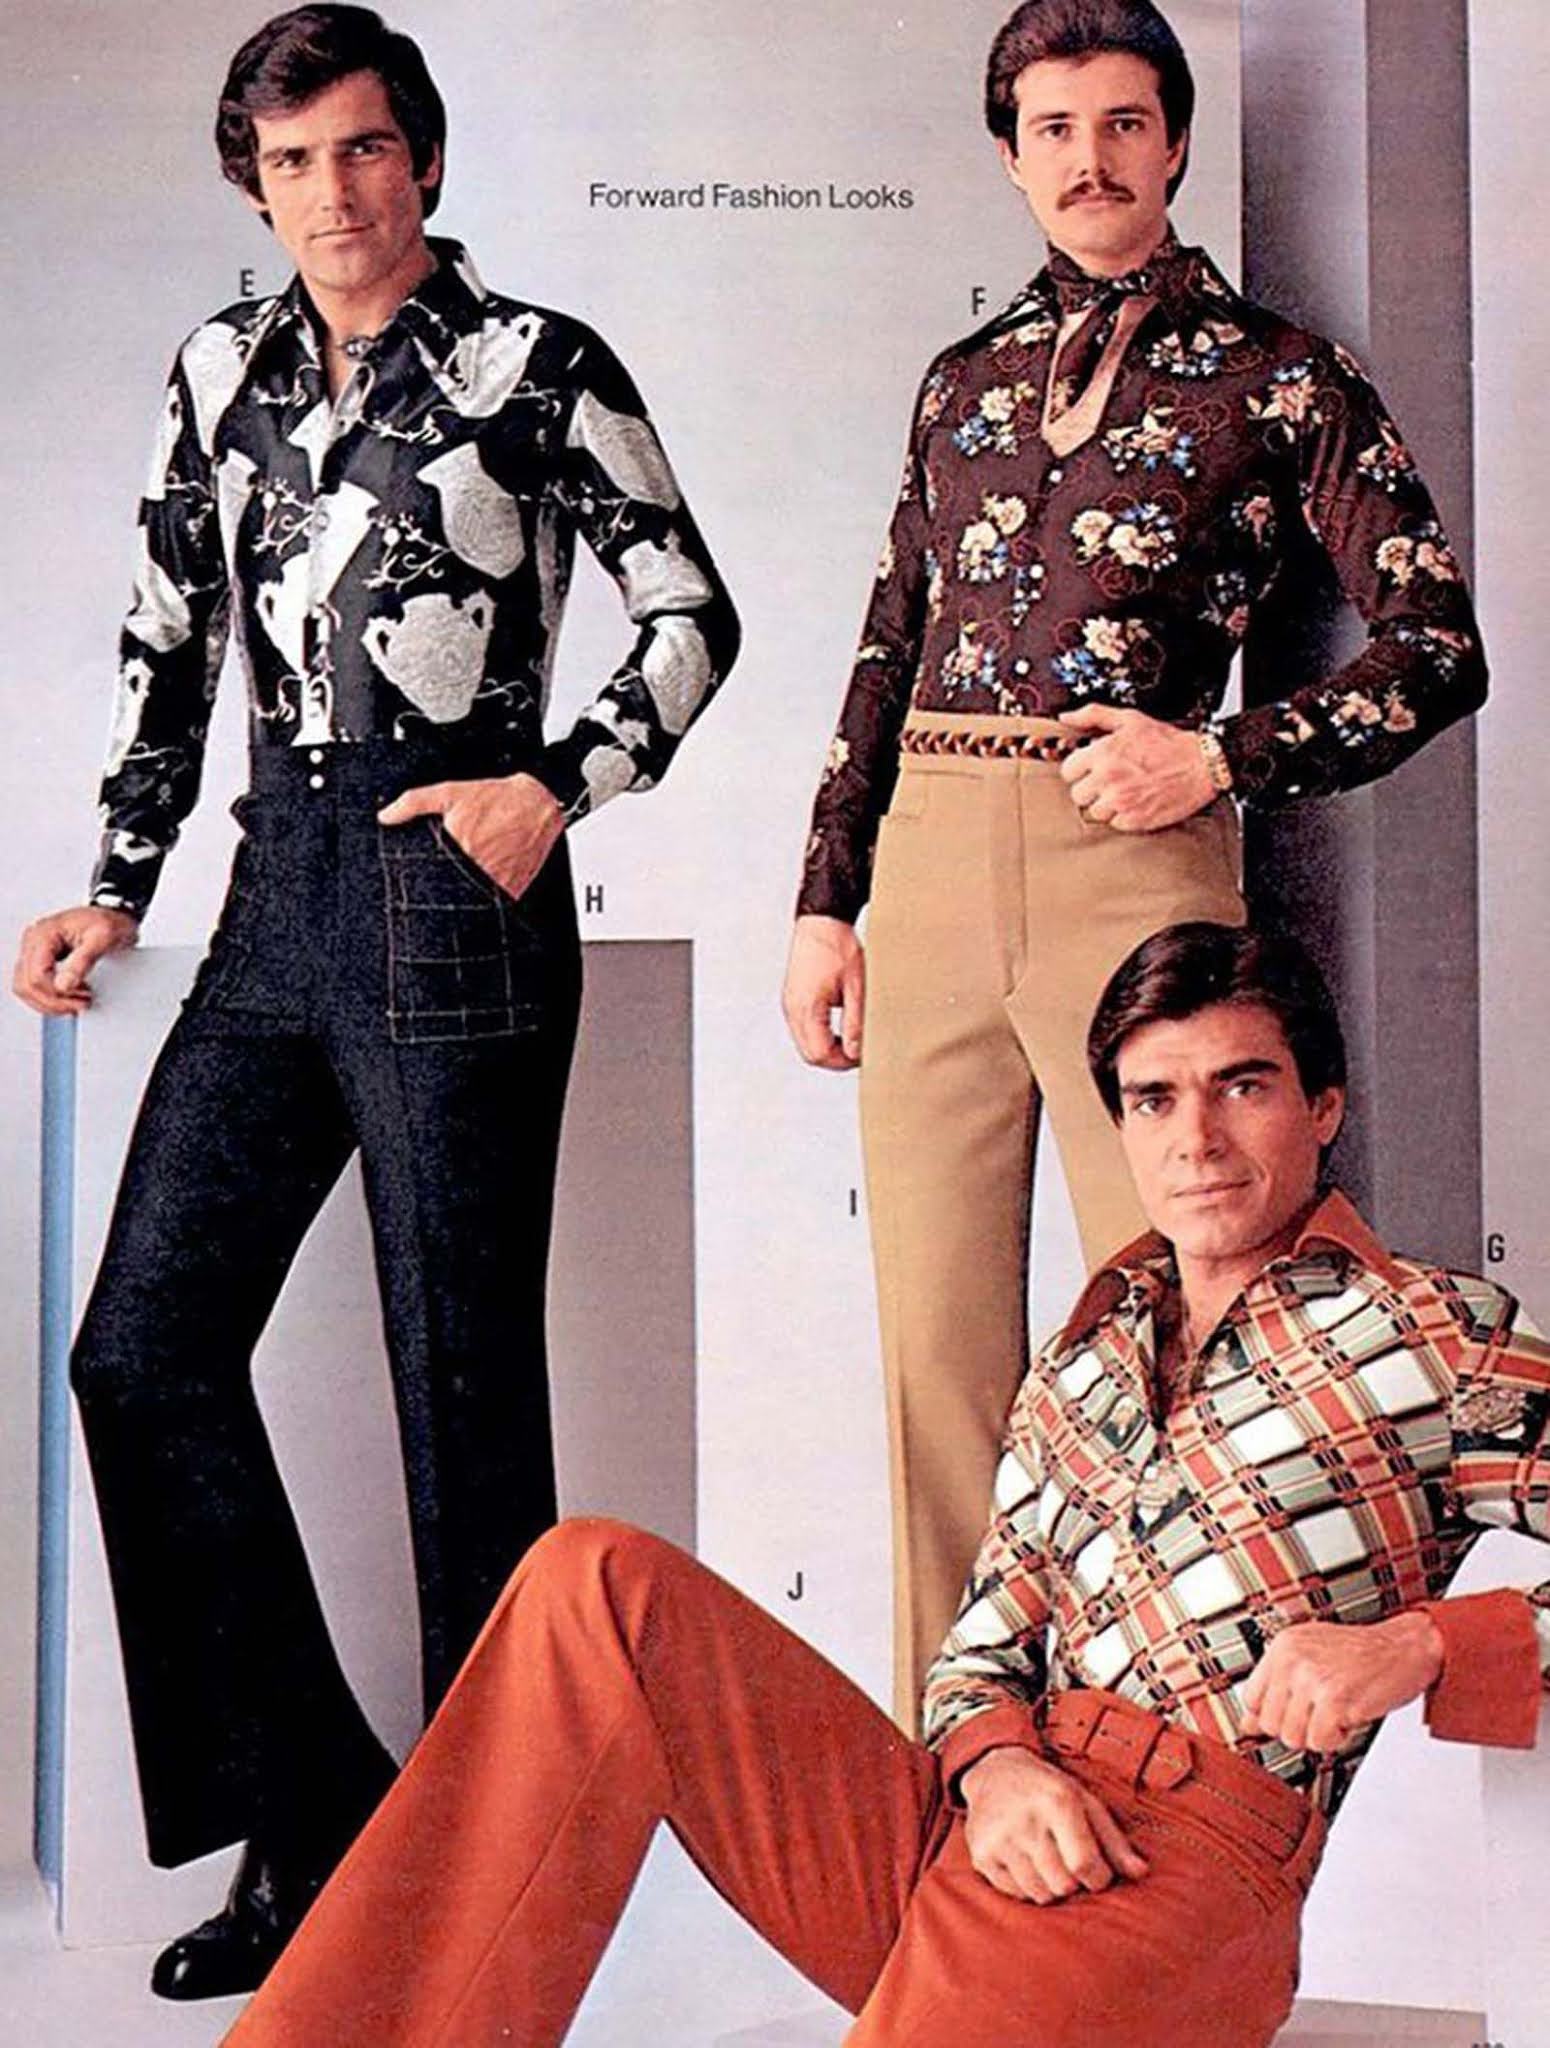 Vintage Photos That Show Why The 1970S Men'S Fashion Should Never Come Back  - Rare Historical Photos